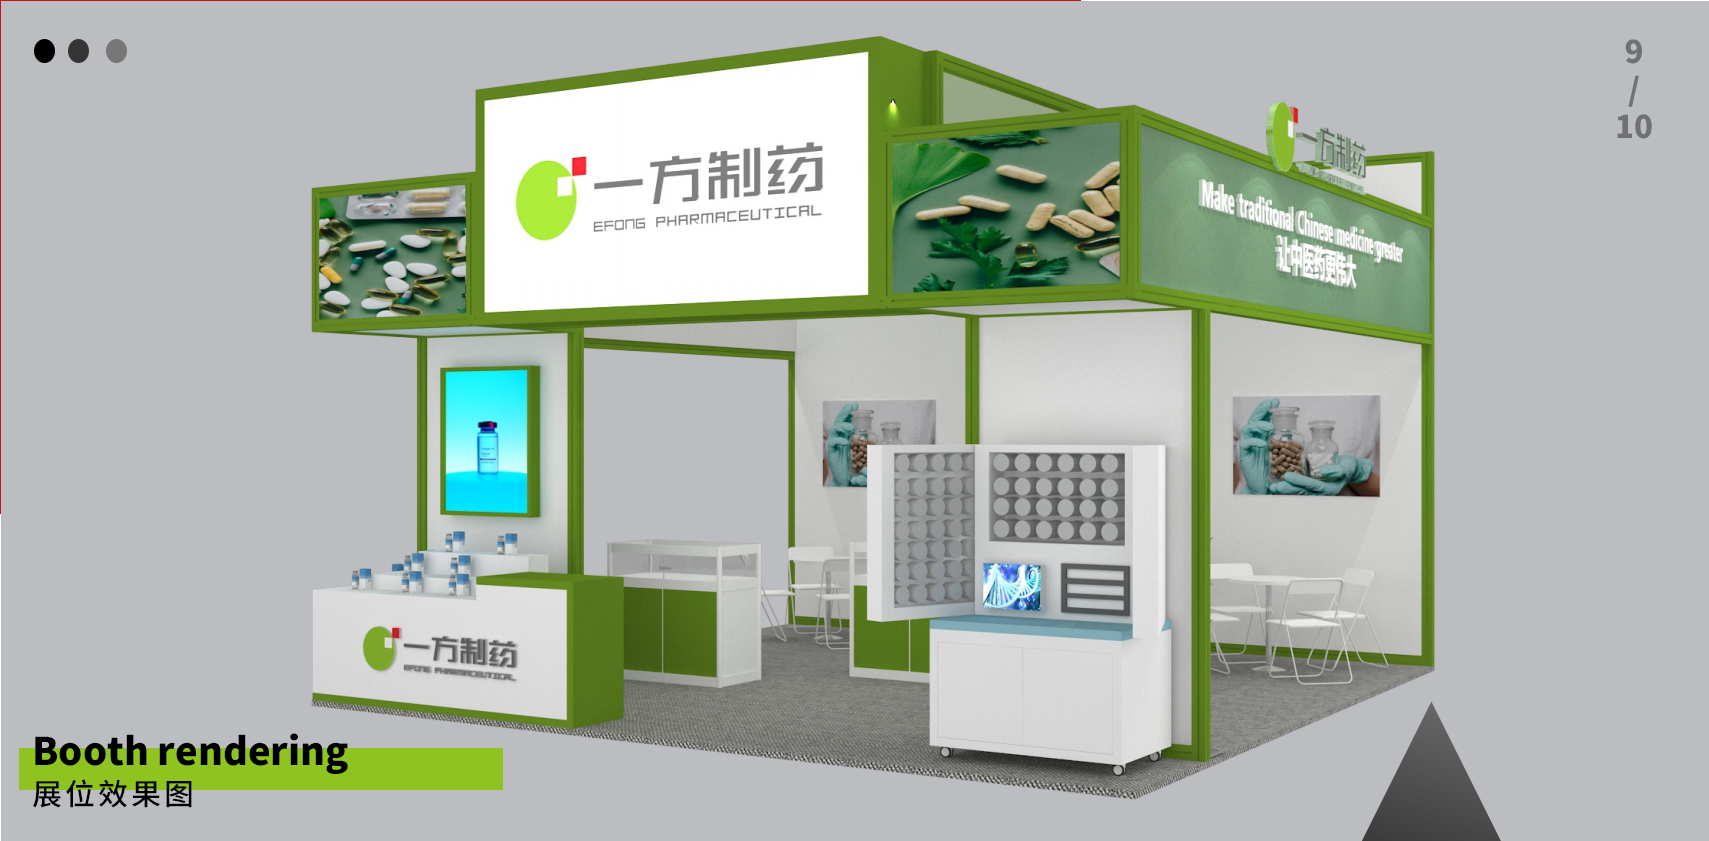 Looking forward toLooking forward to the performance of YIFANG Pharmaceutical in Chexpo Macao